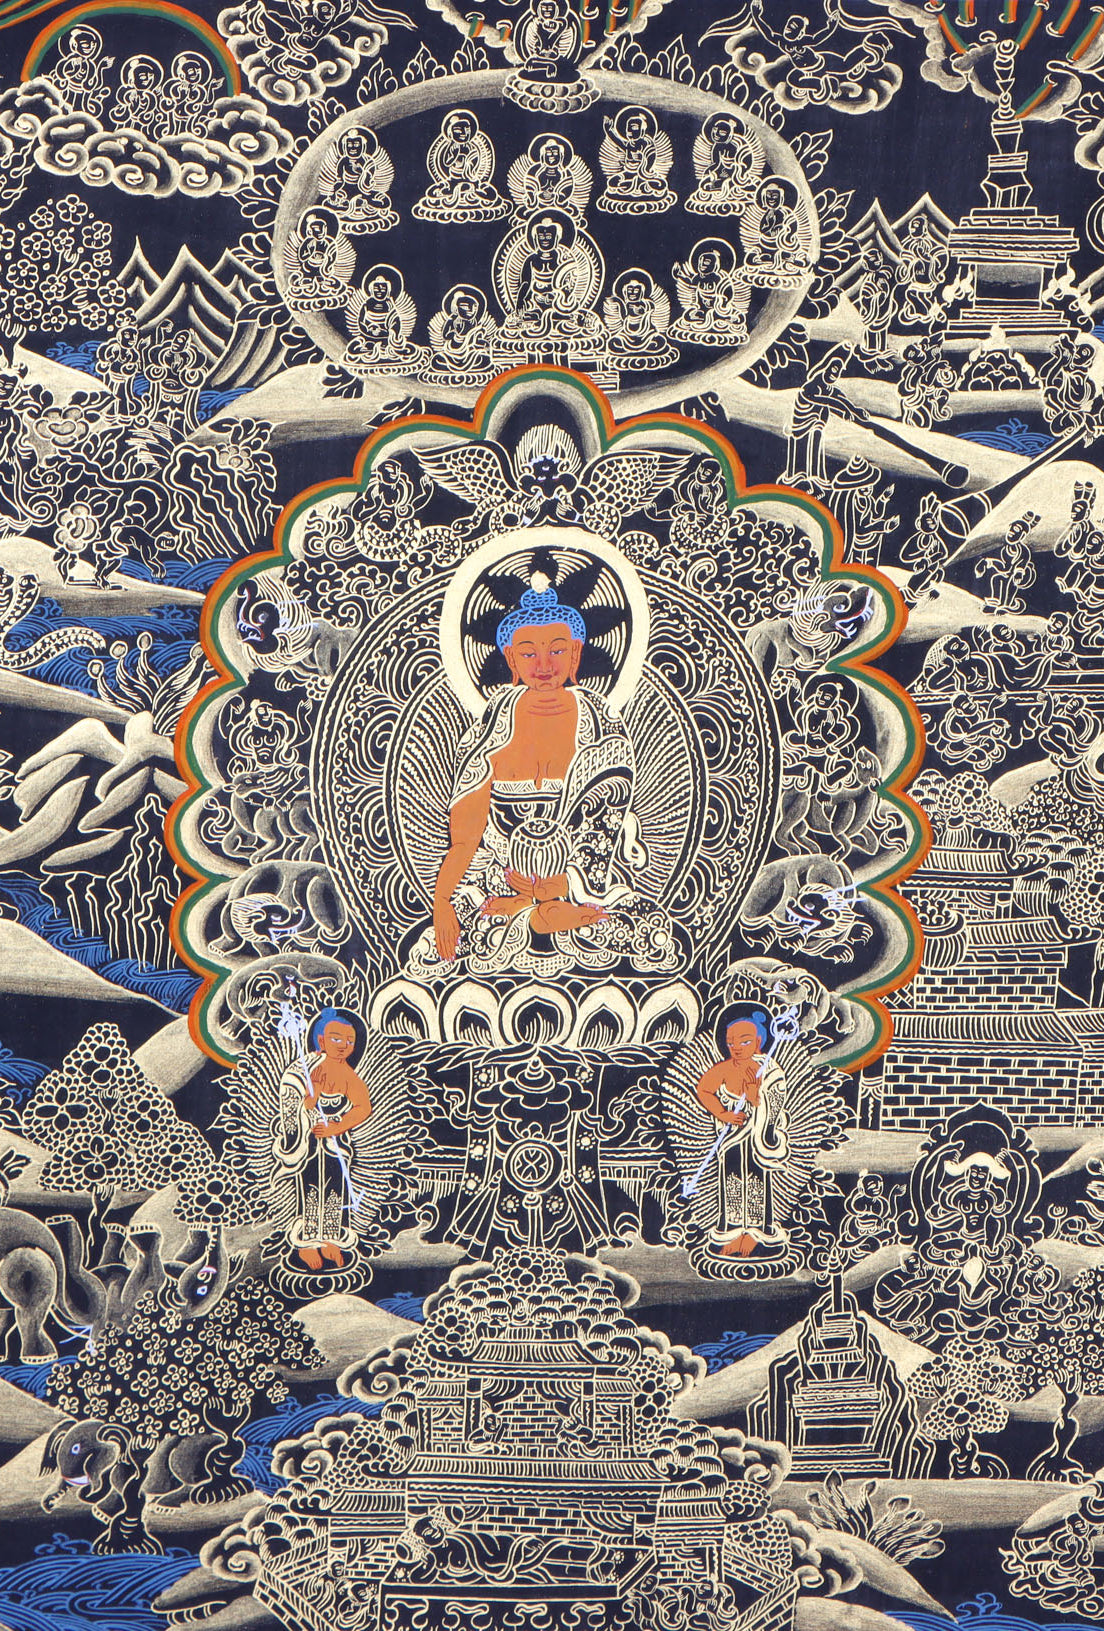 Buddha life thangka for spiritual lectures and ceremonies instructional purposes.